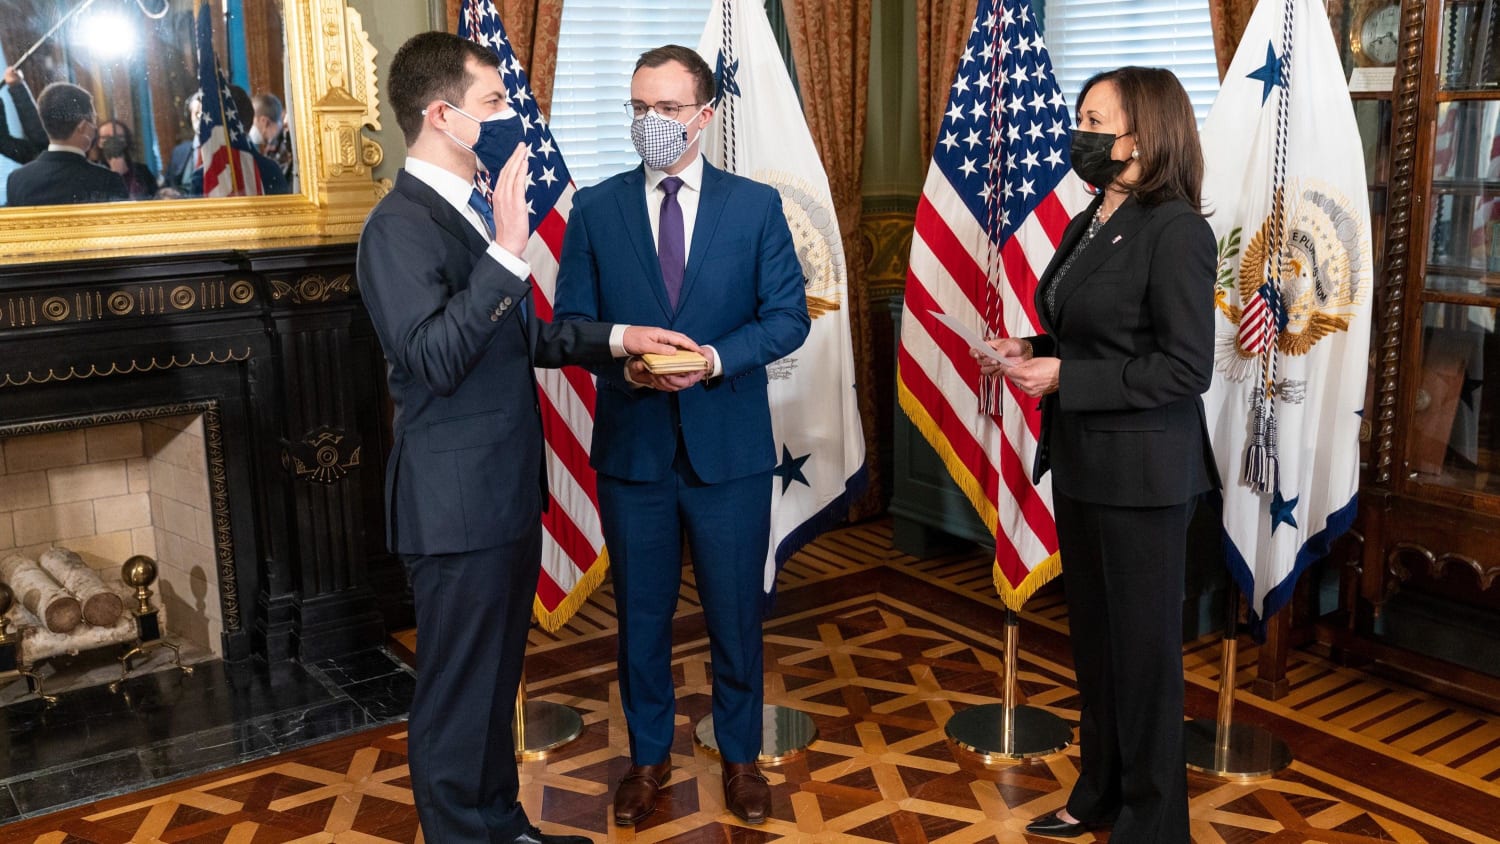 Pete Buttigieg being sworn in as the first openly gay confirmed cabinet member with husband at side